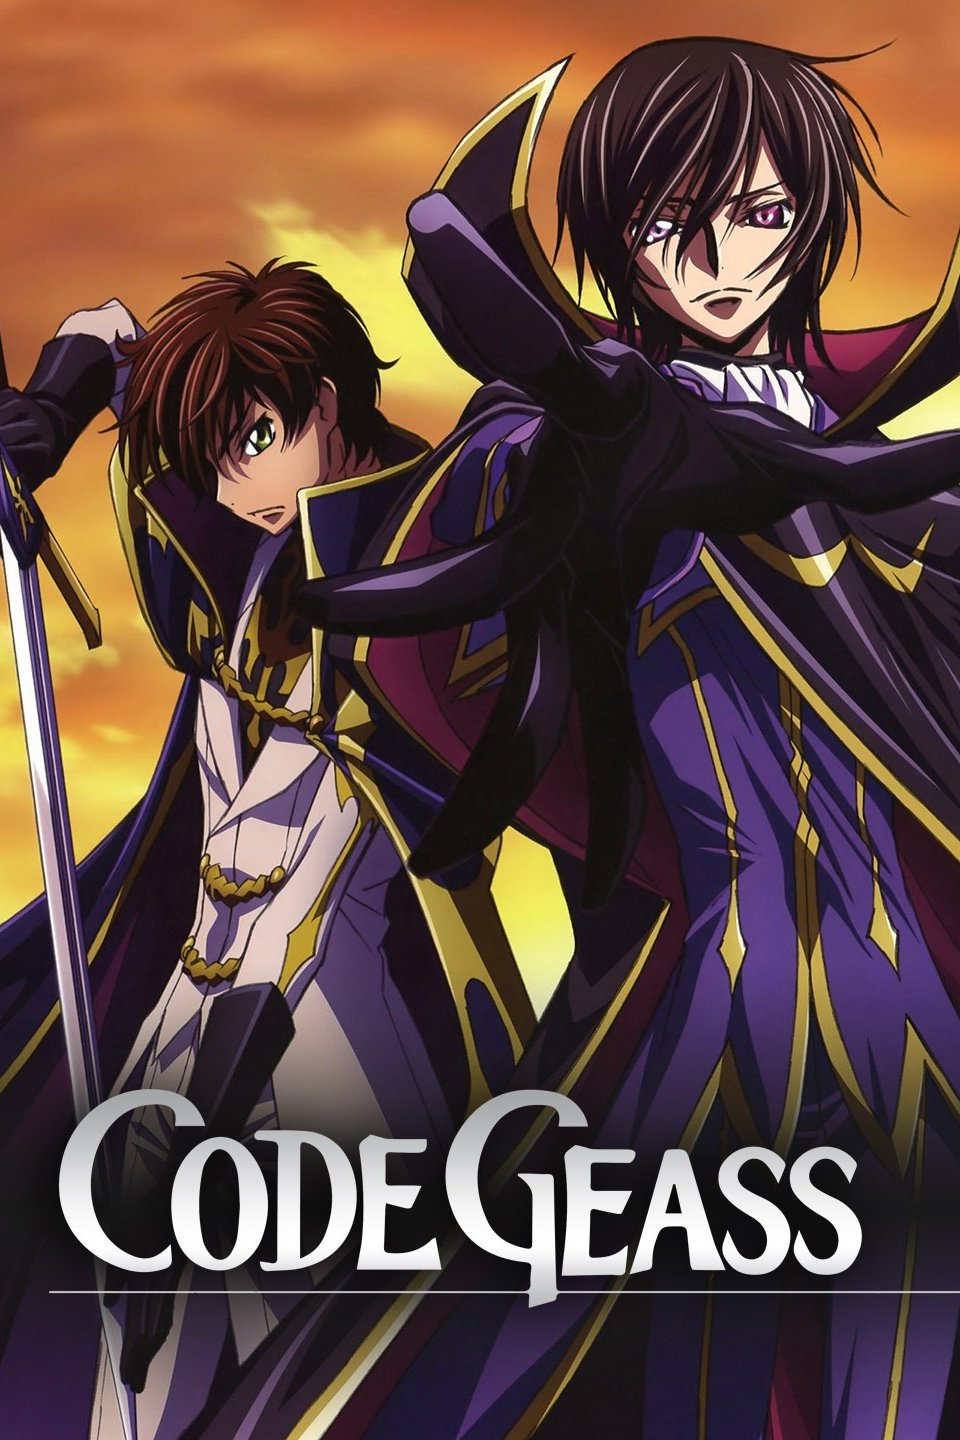 Code Geass: Lelouch of the Re;surrection Anime Film Gets 4D Screenings -  News - Anime News Network